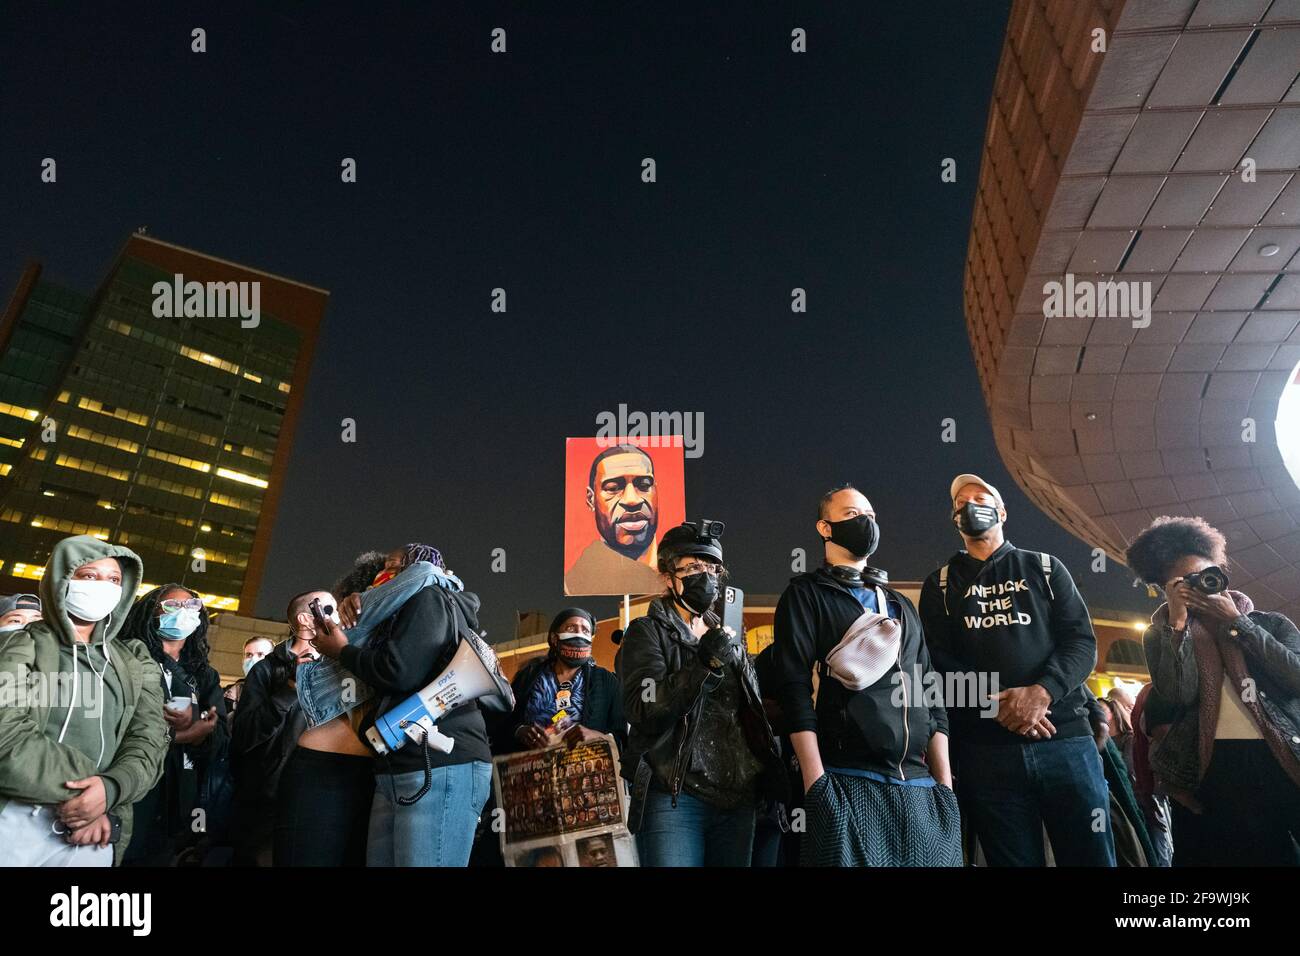 Brooklyn, New York, USA 20 Apr 2021. Protesters gather at Barclays Center hours after a jury found former Minneapolis police officer Derek Chauvin guilty of murdering George Floyd in 2020. Stock Photo